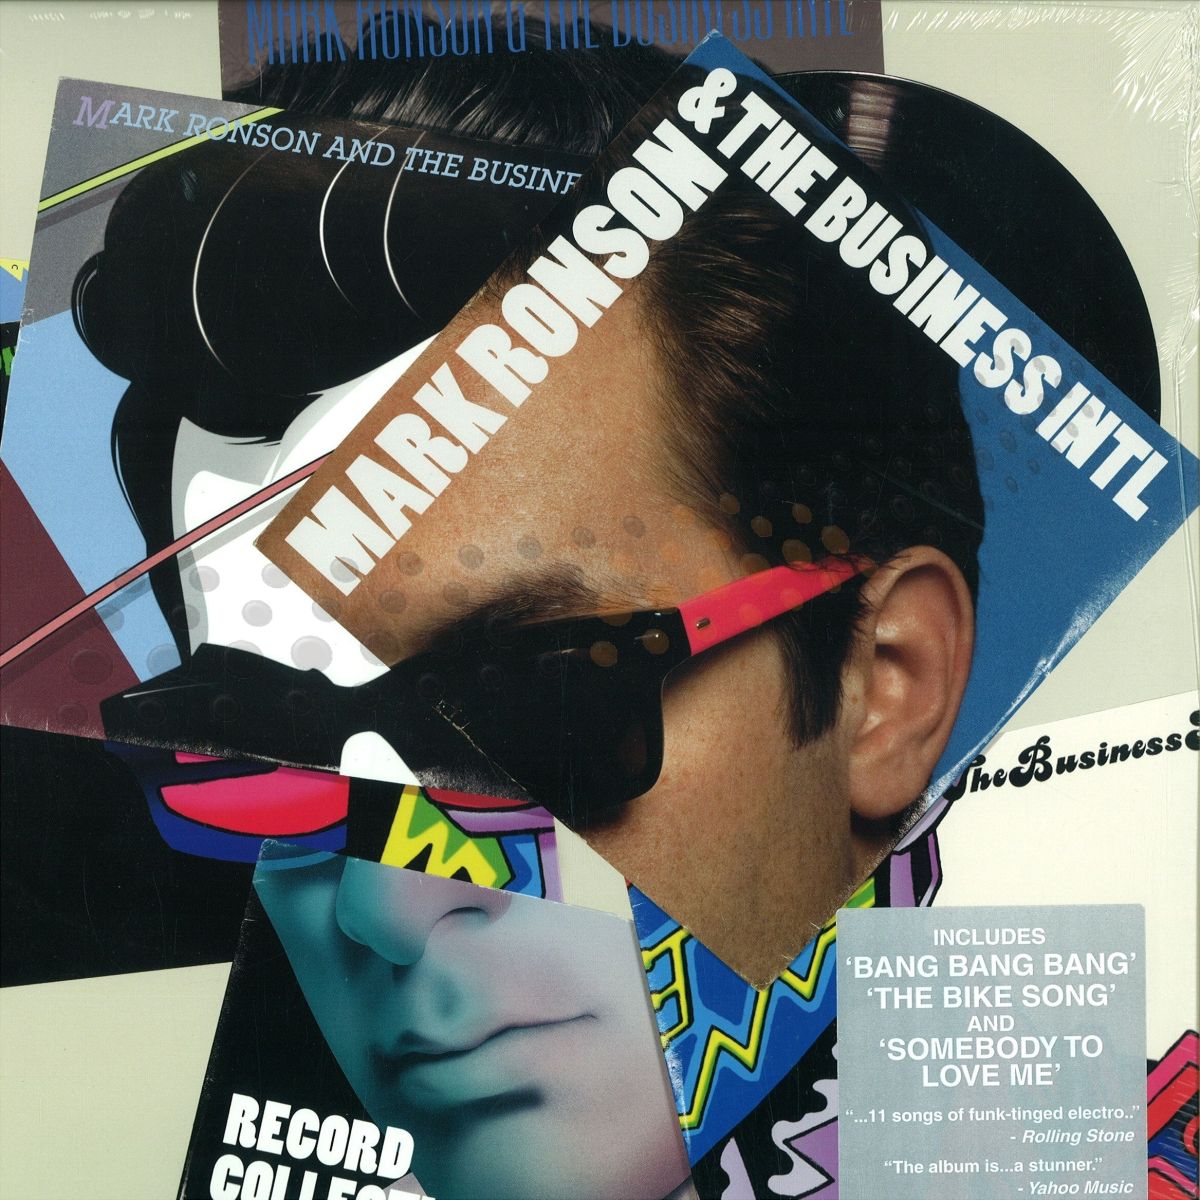 Mark collection. Mark Ronson & the Business Intl. Mark Ronson record collection. Mark Music records.